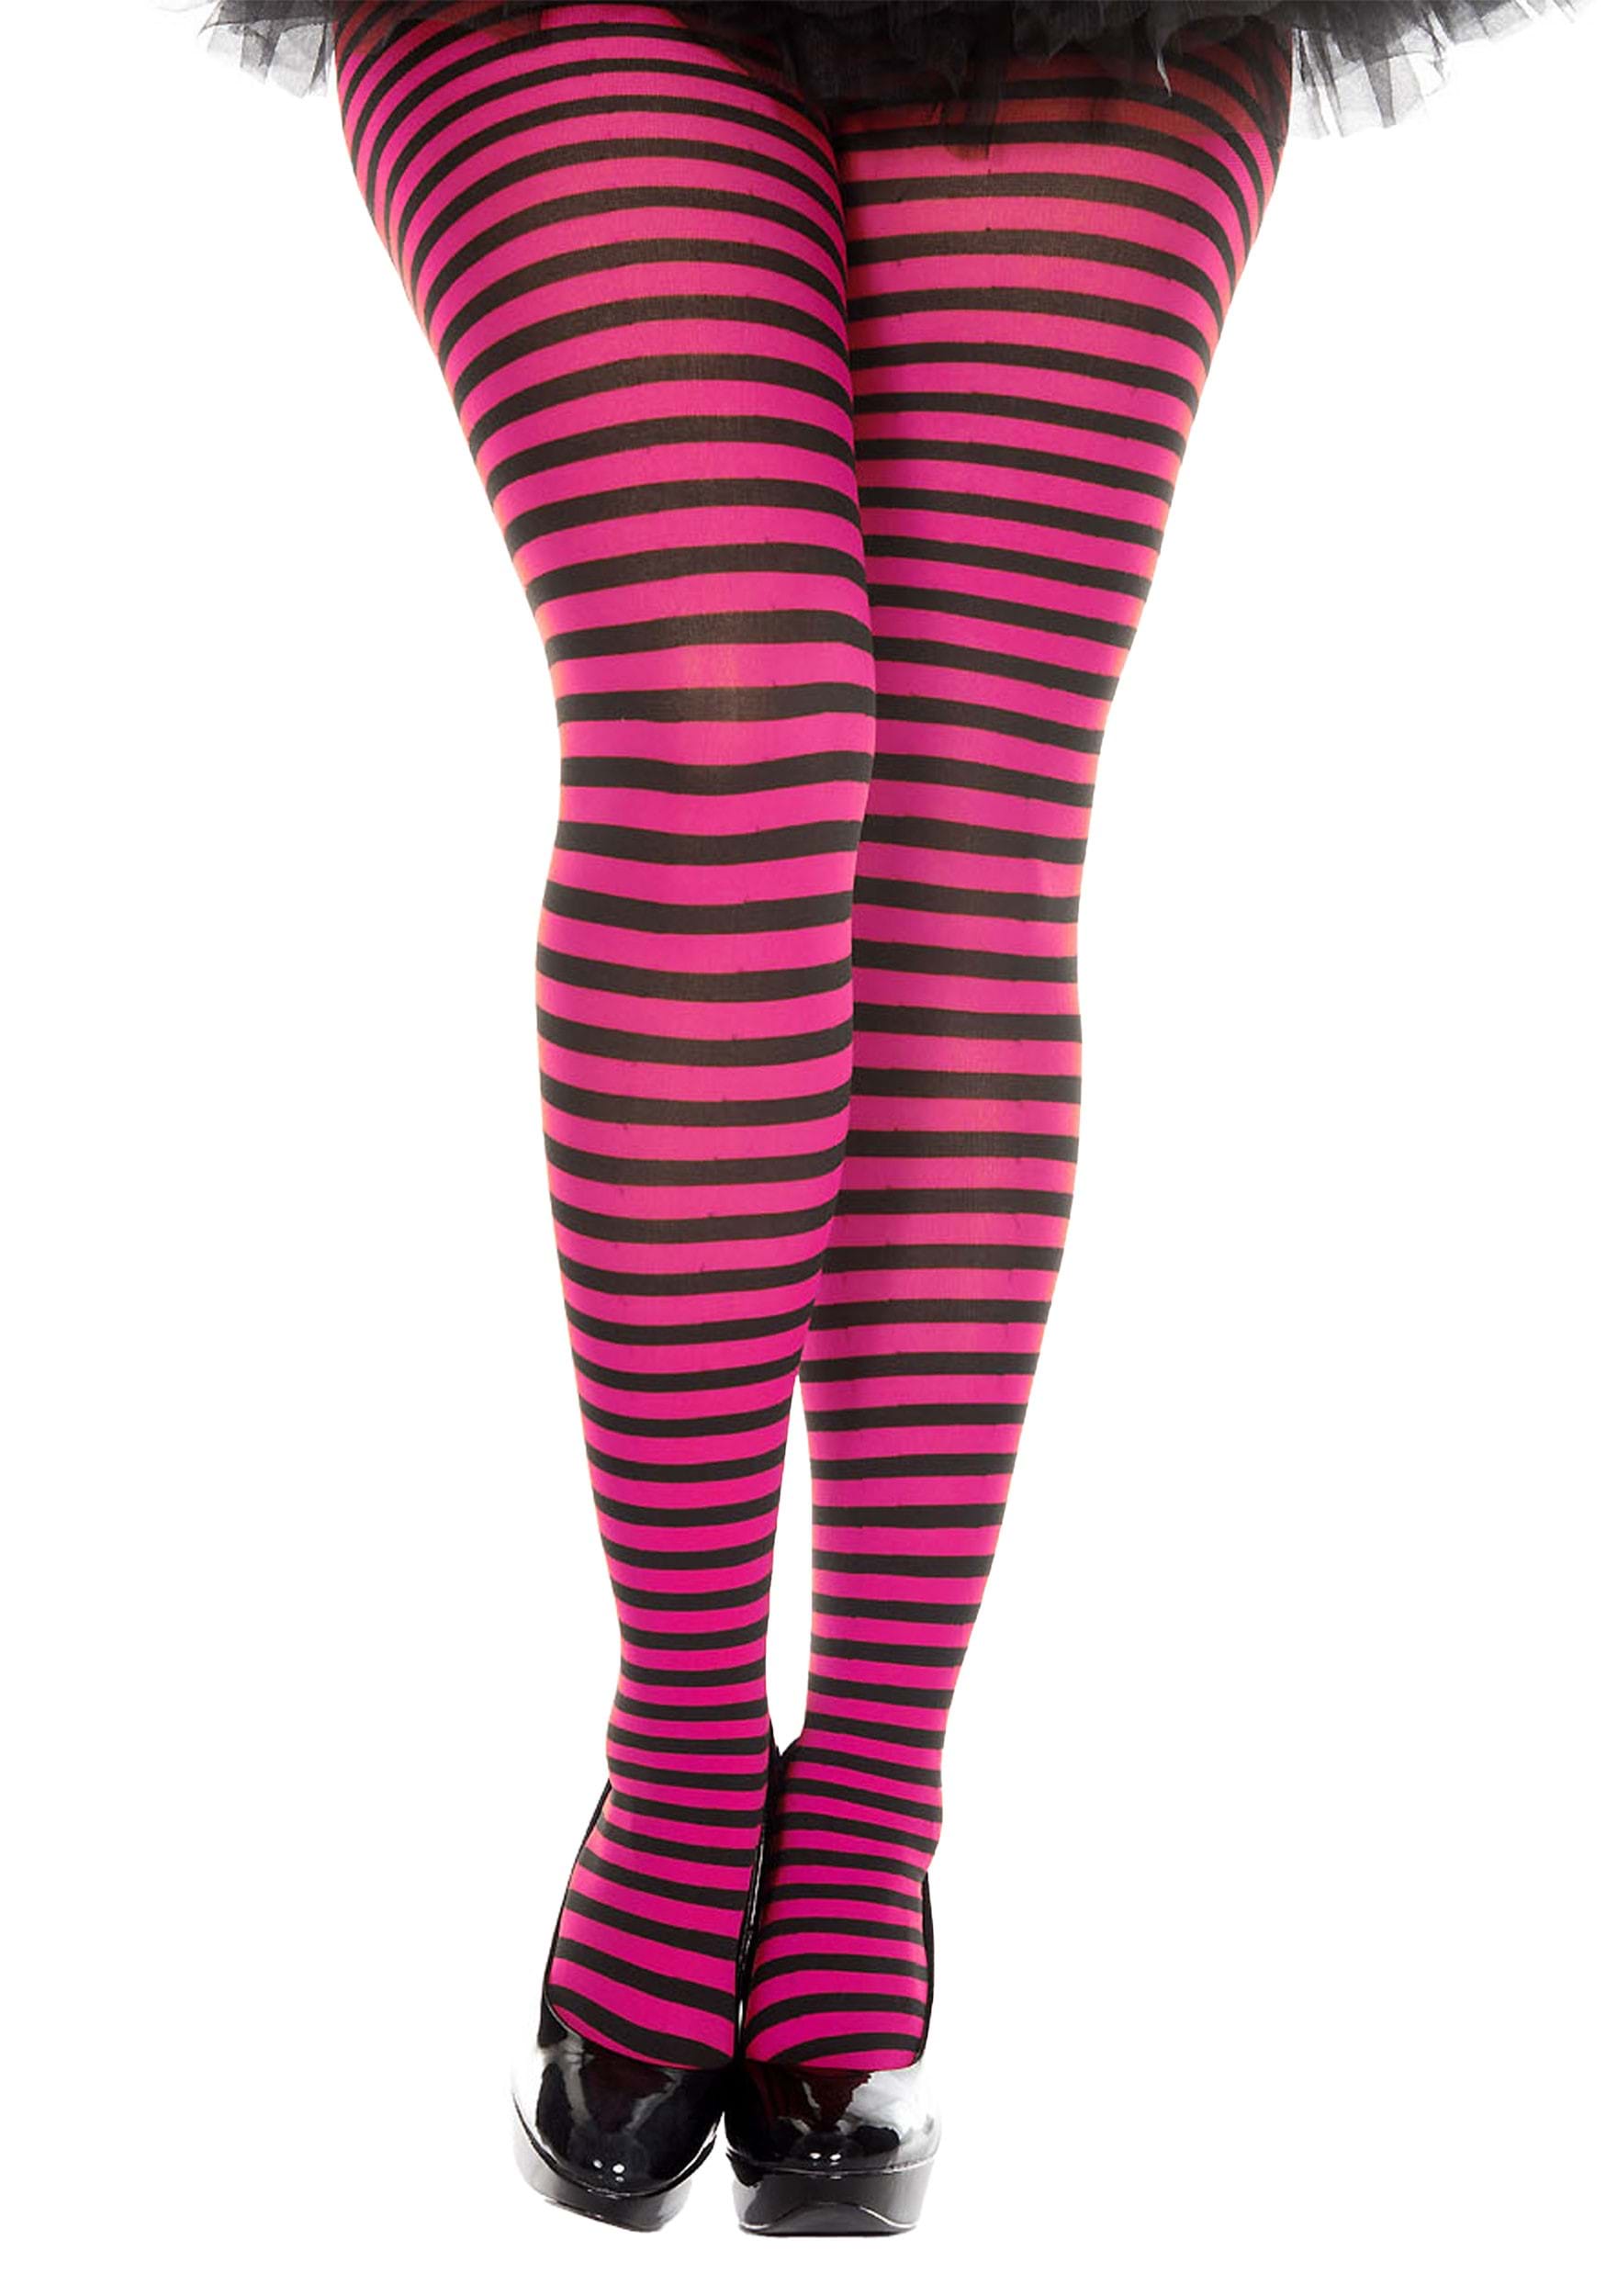 Pink Tights - Costume Tights 